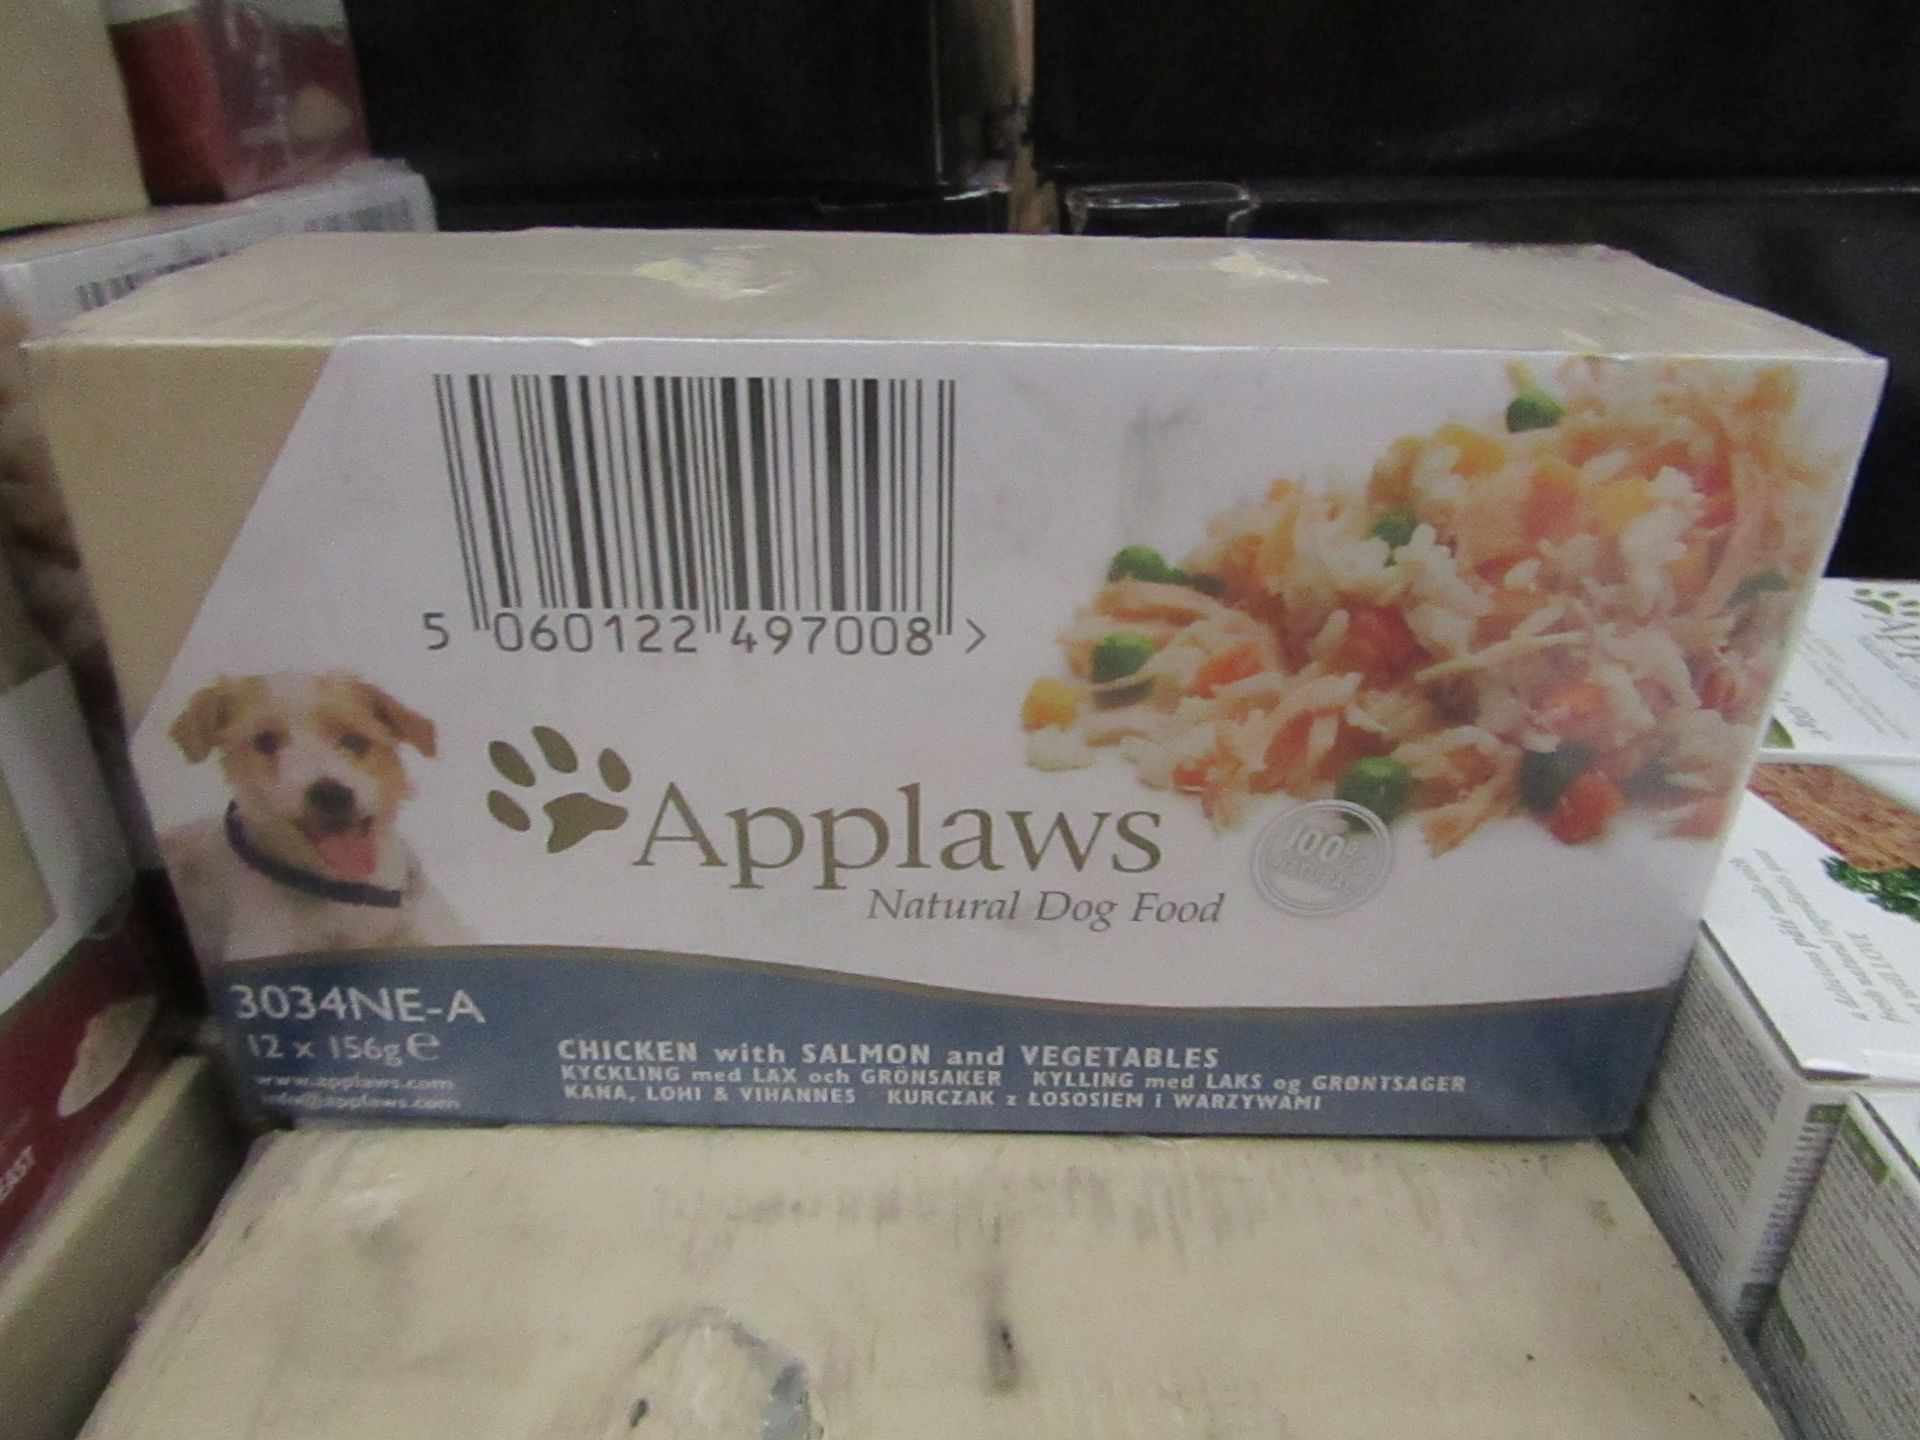 Applaws - Chicken with Salmon and Veg dog food (12x 156g) - BBDApril 2023.